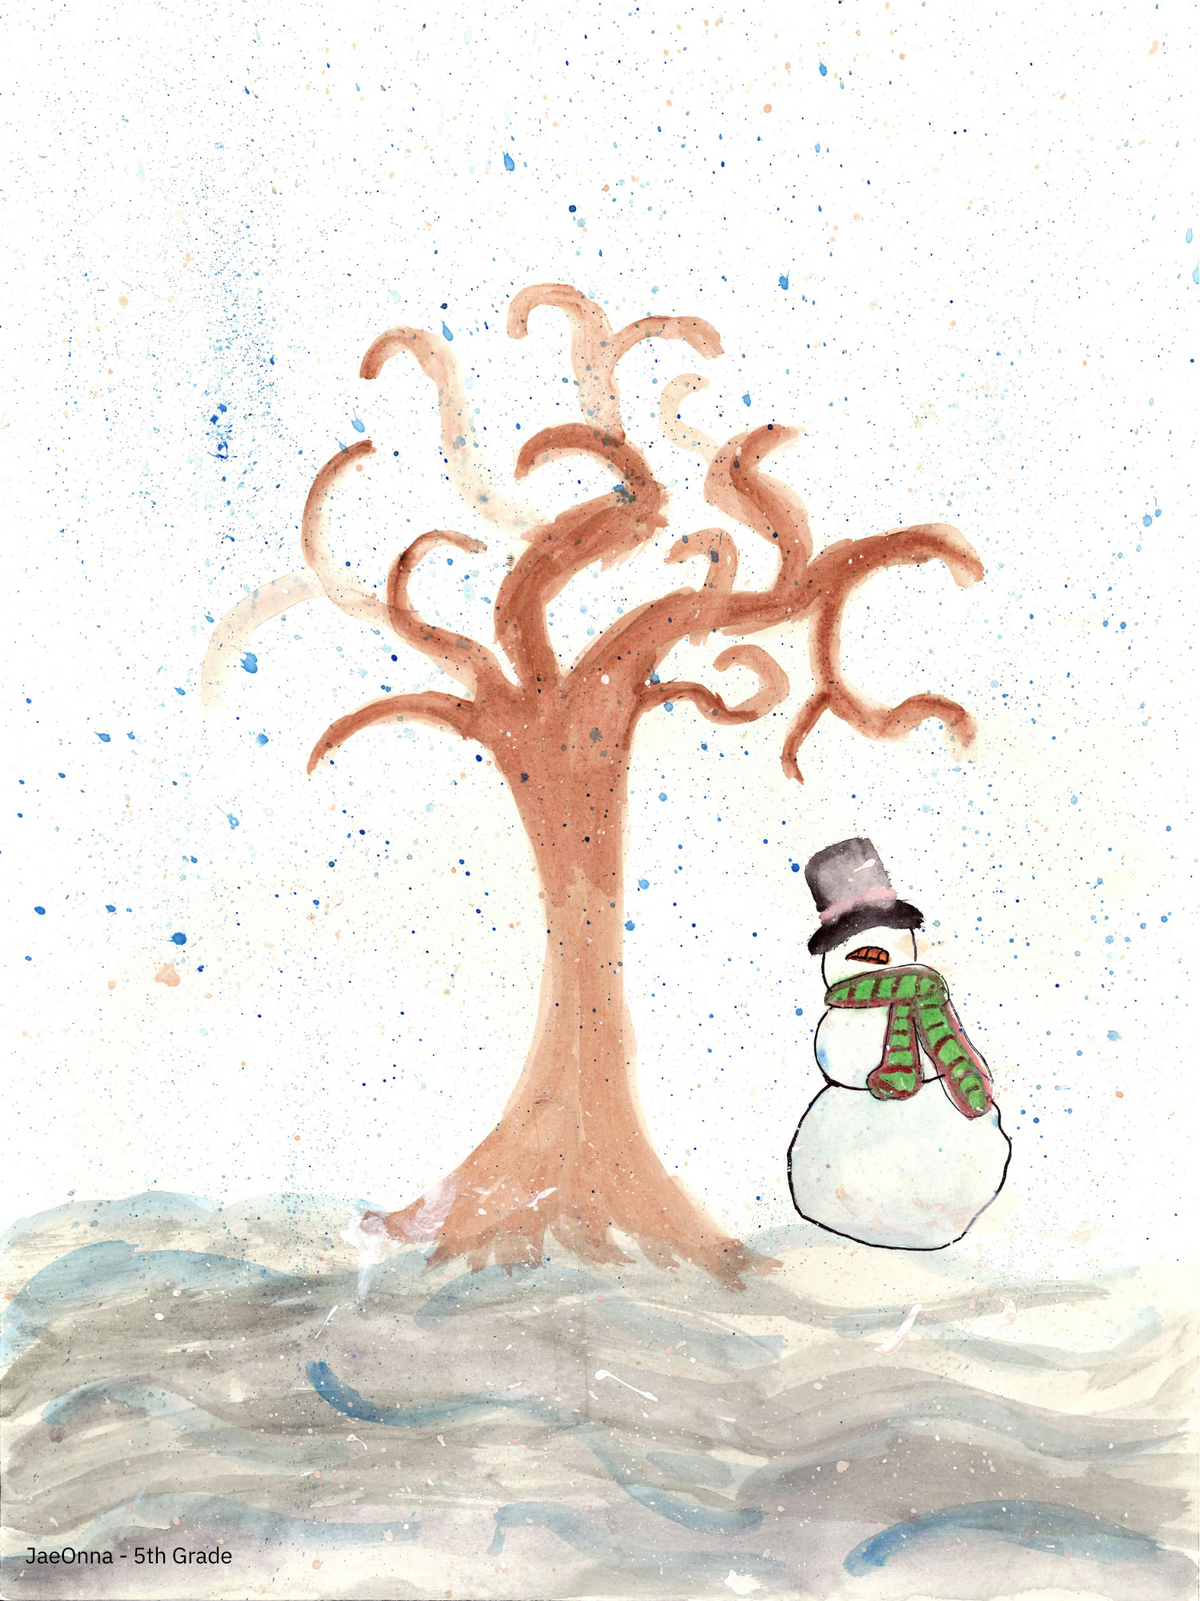 Student's artwork shows a snowman next to a barren tree in a wintry landscape